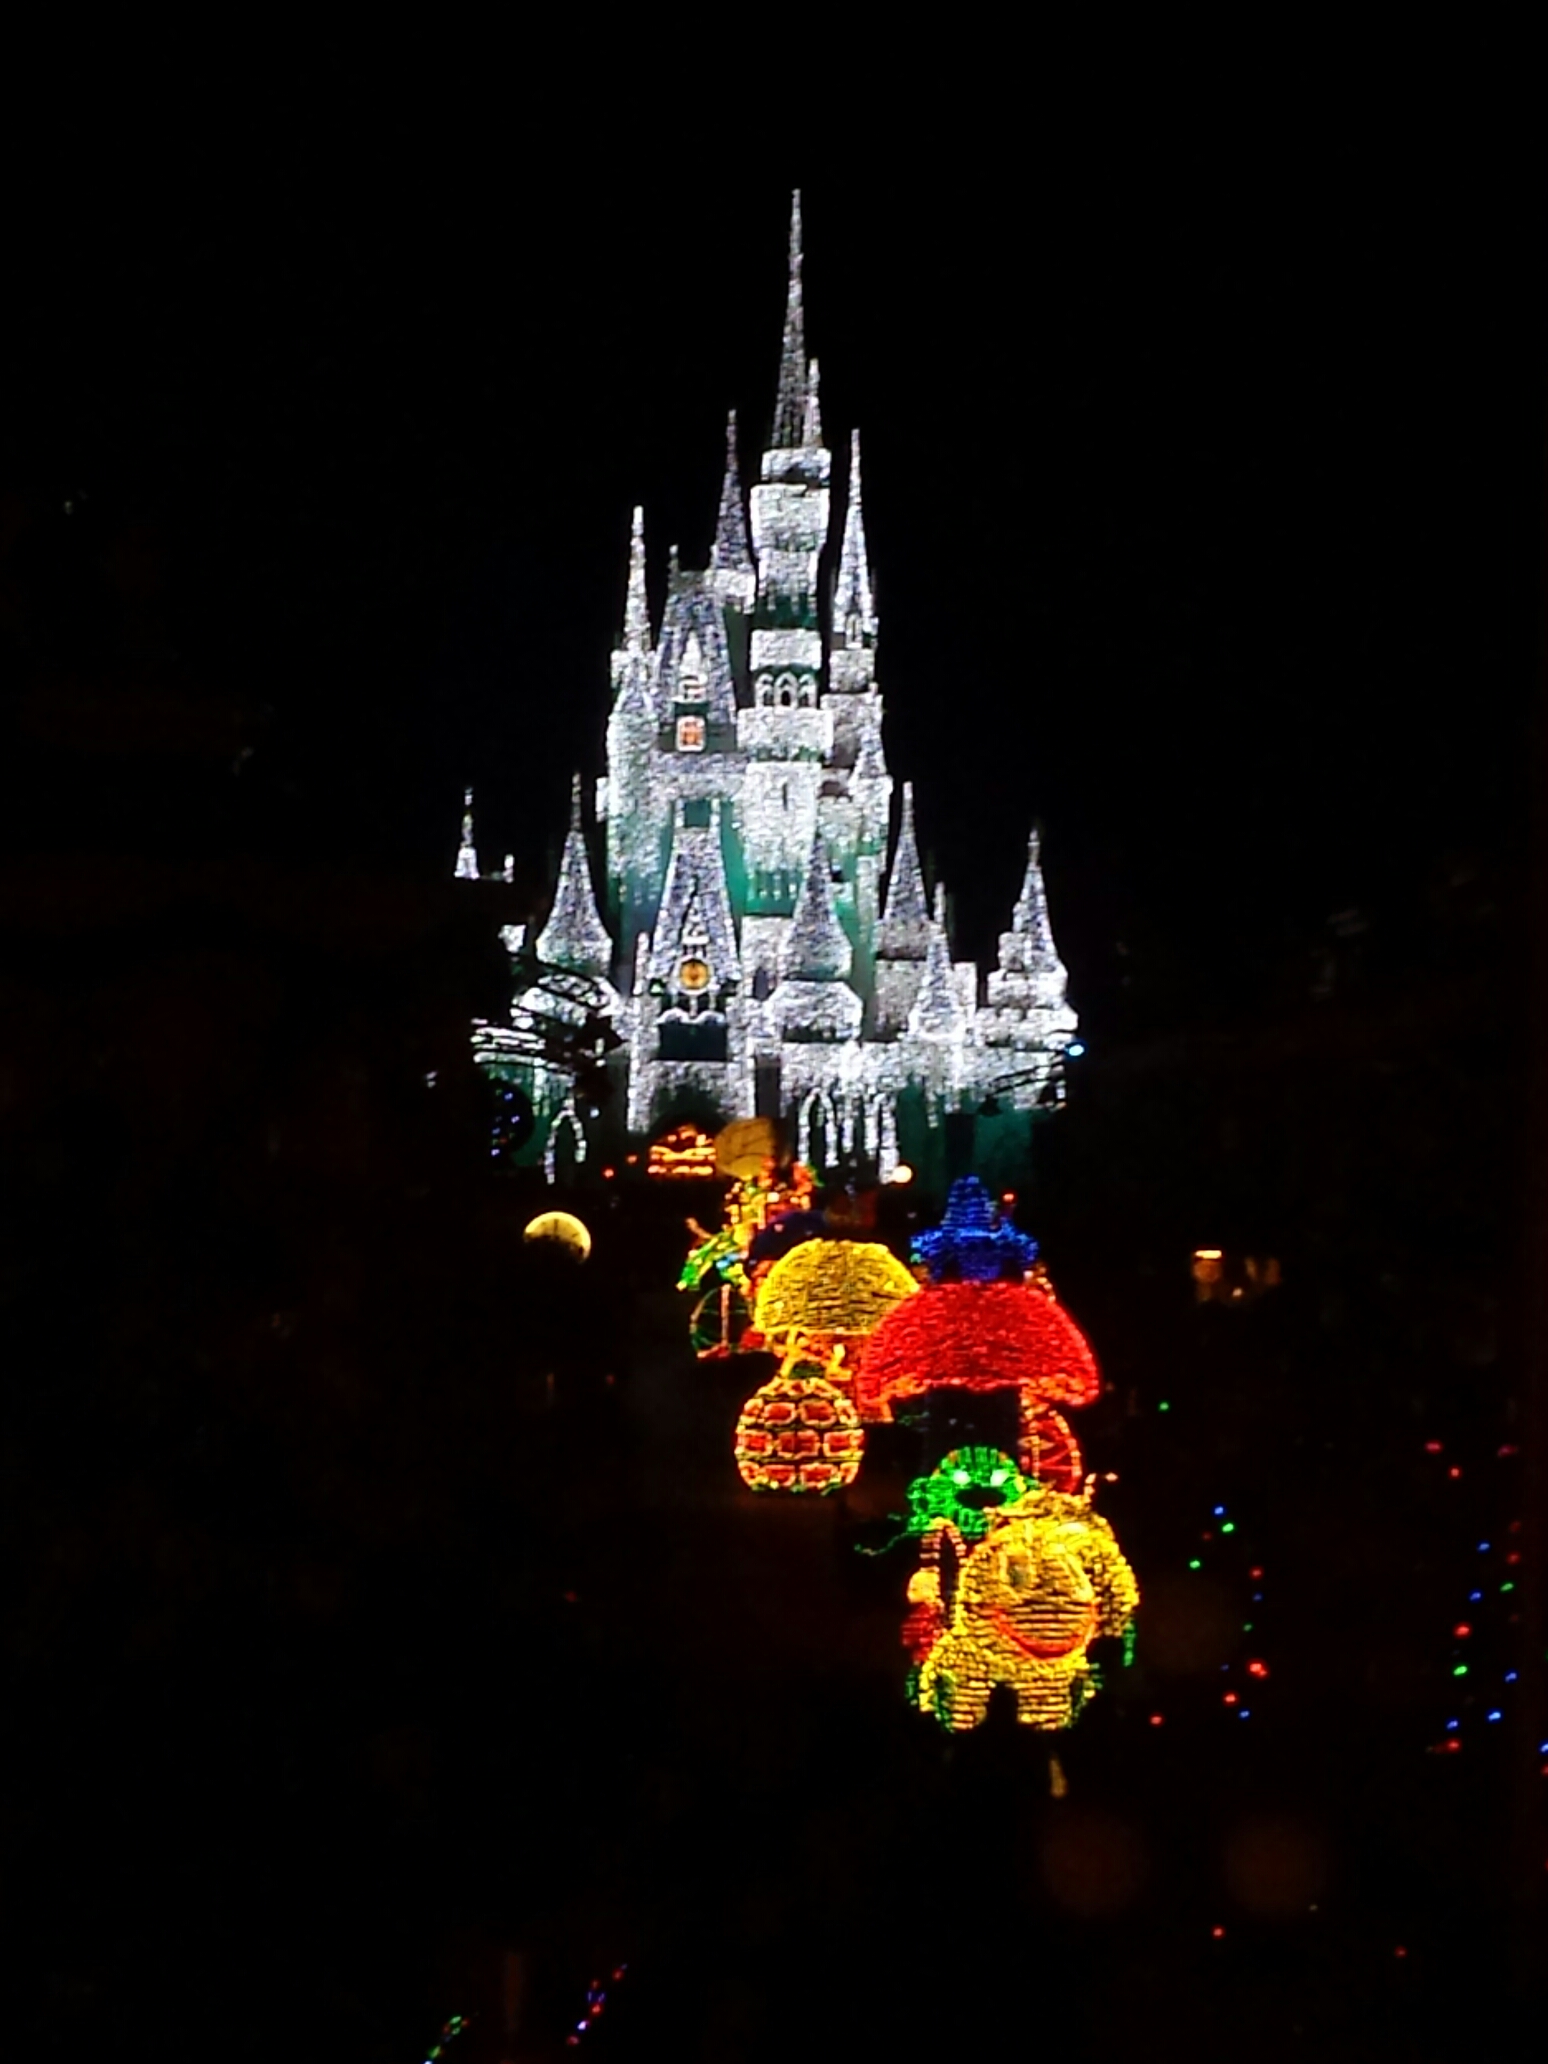 The Main Street Electrical Parade working its way up Main Street toward Cinderella Castle.